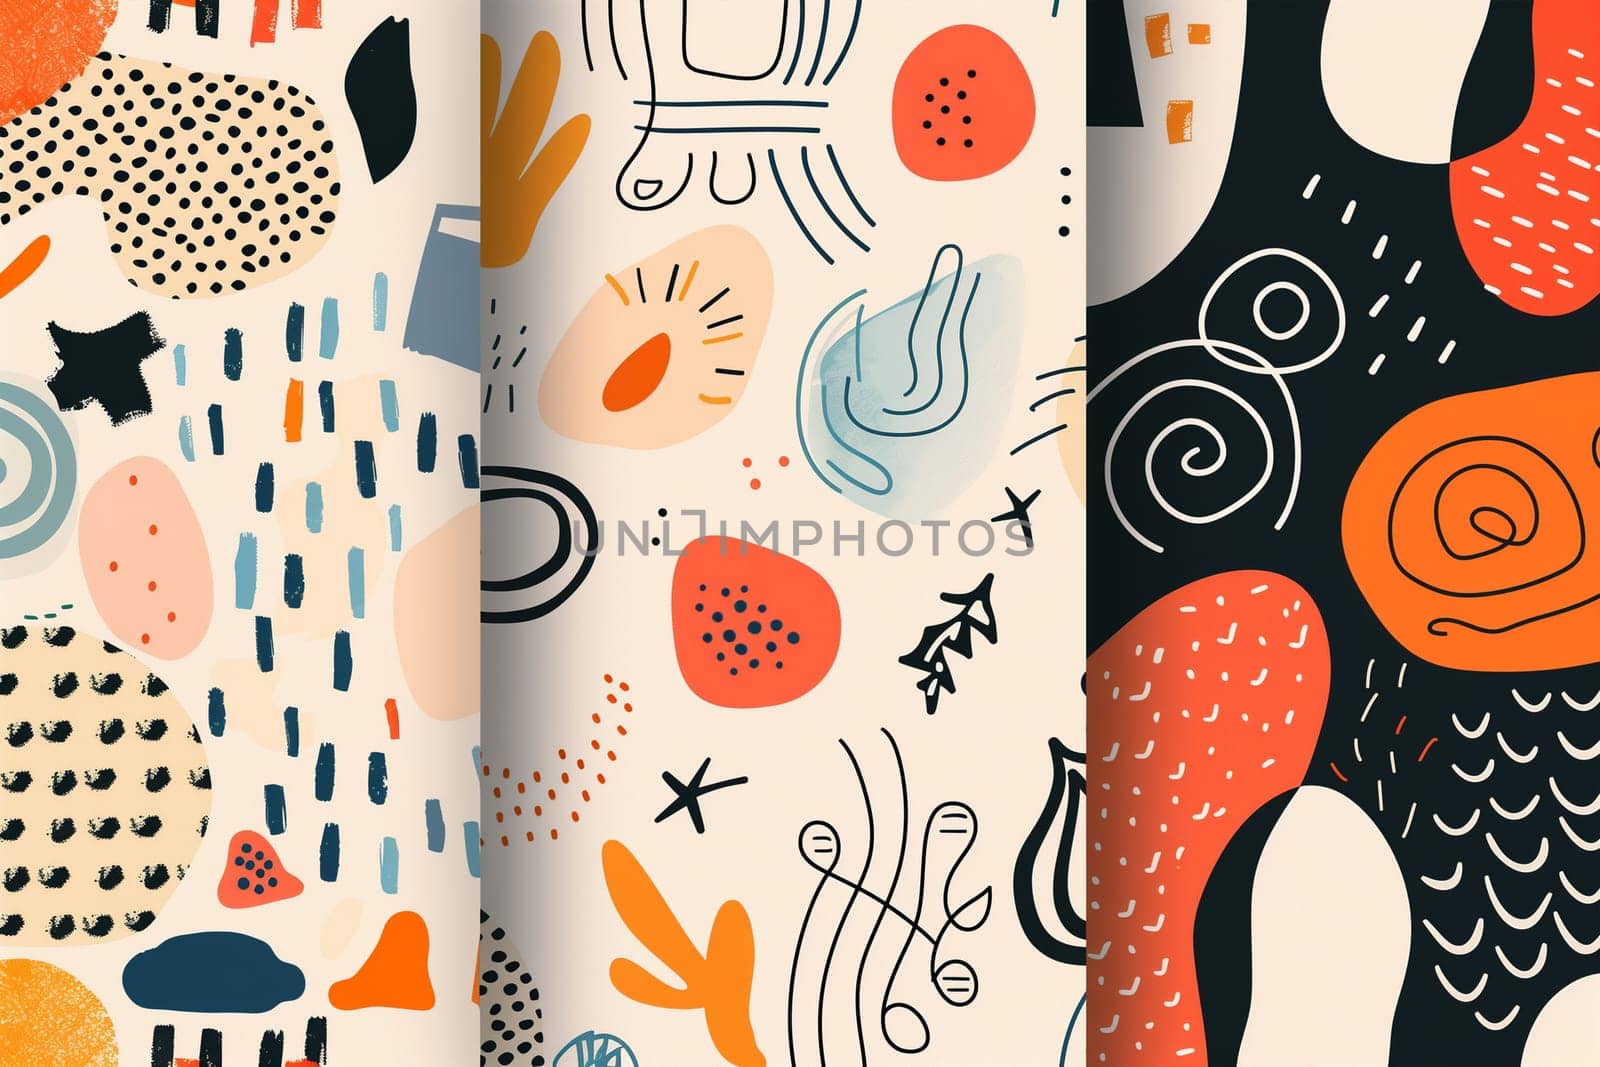 Three unique patterns featuring various shapes and sizes create an intriguing visual composition.